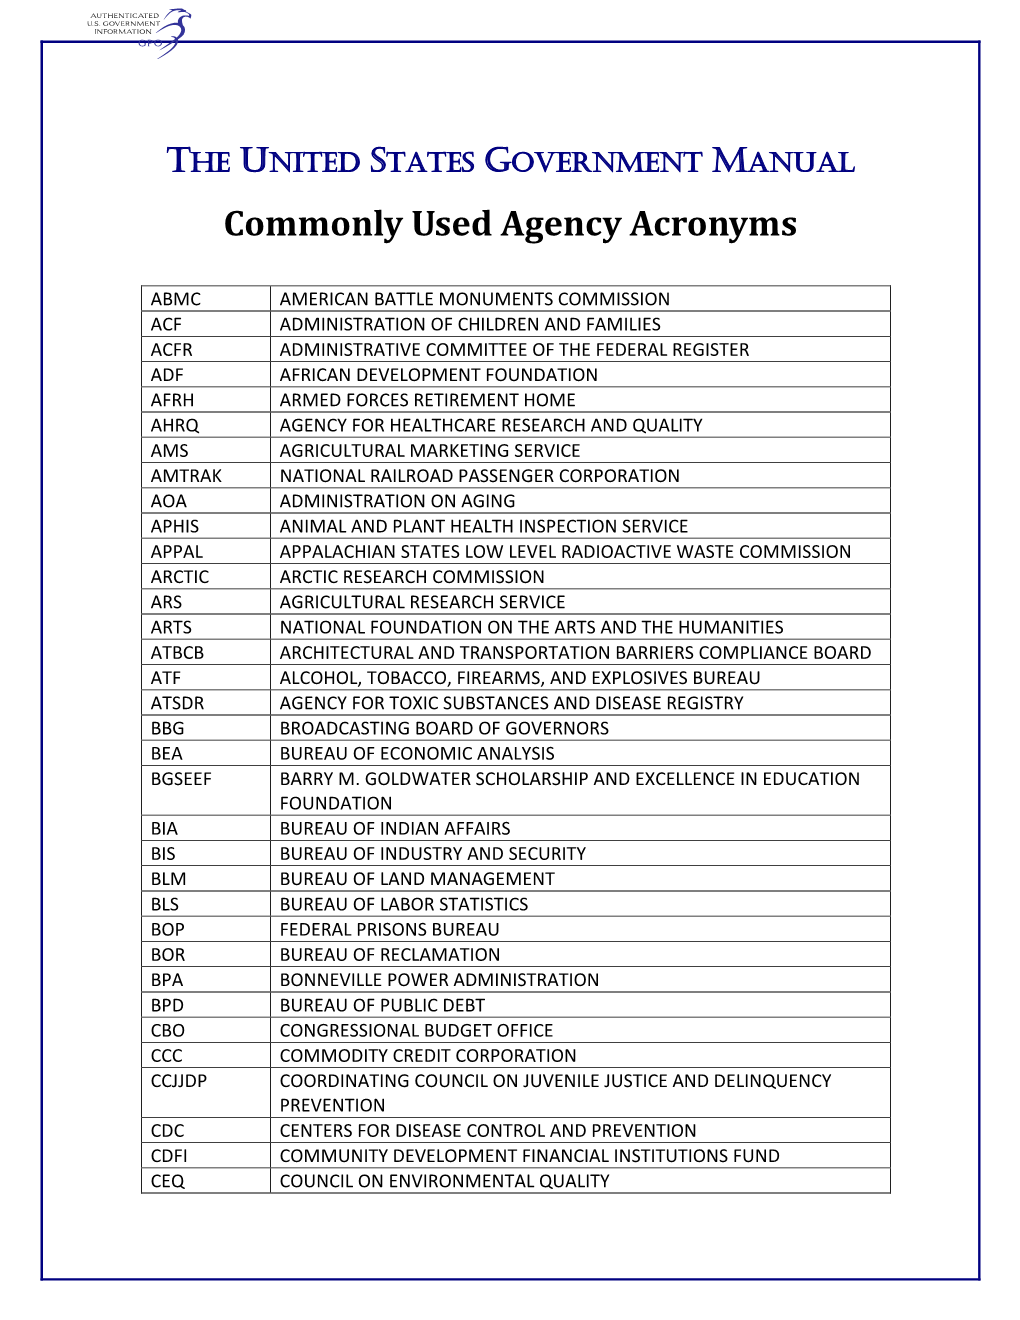 Commonly Used Agency Acronyms